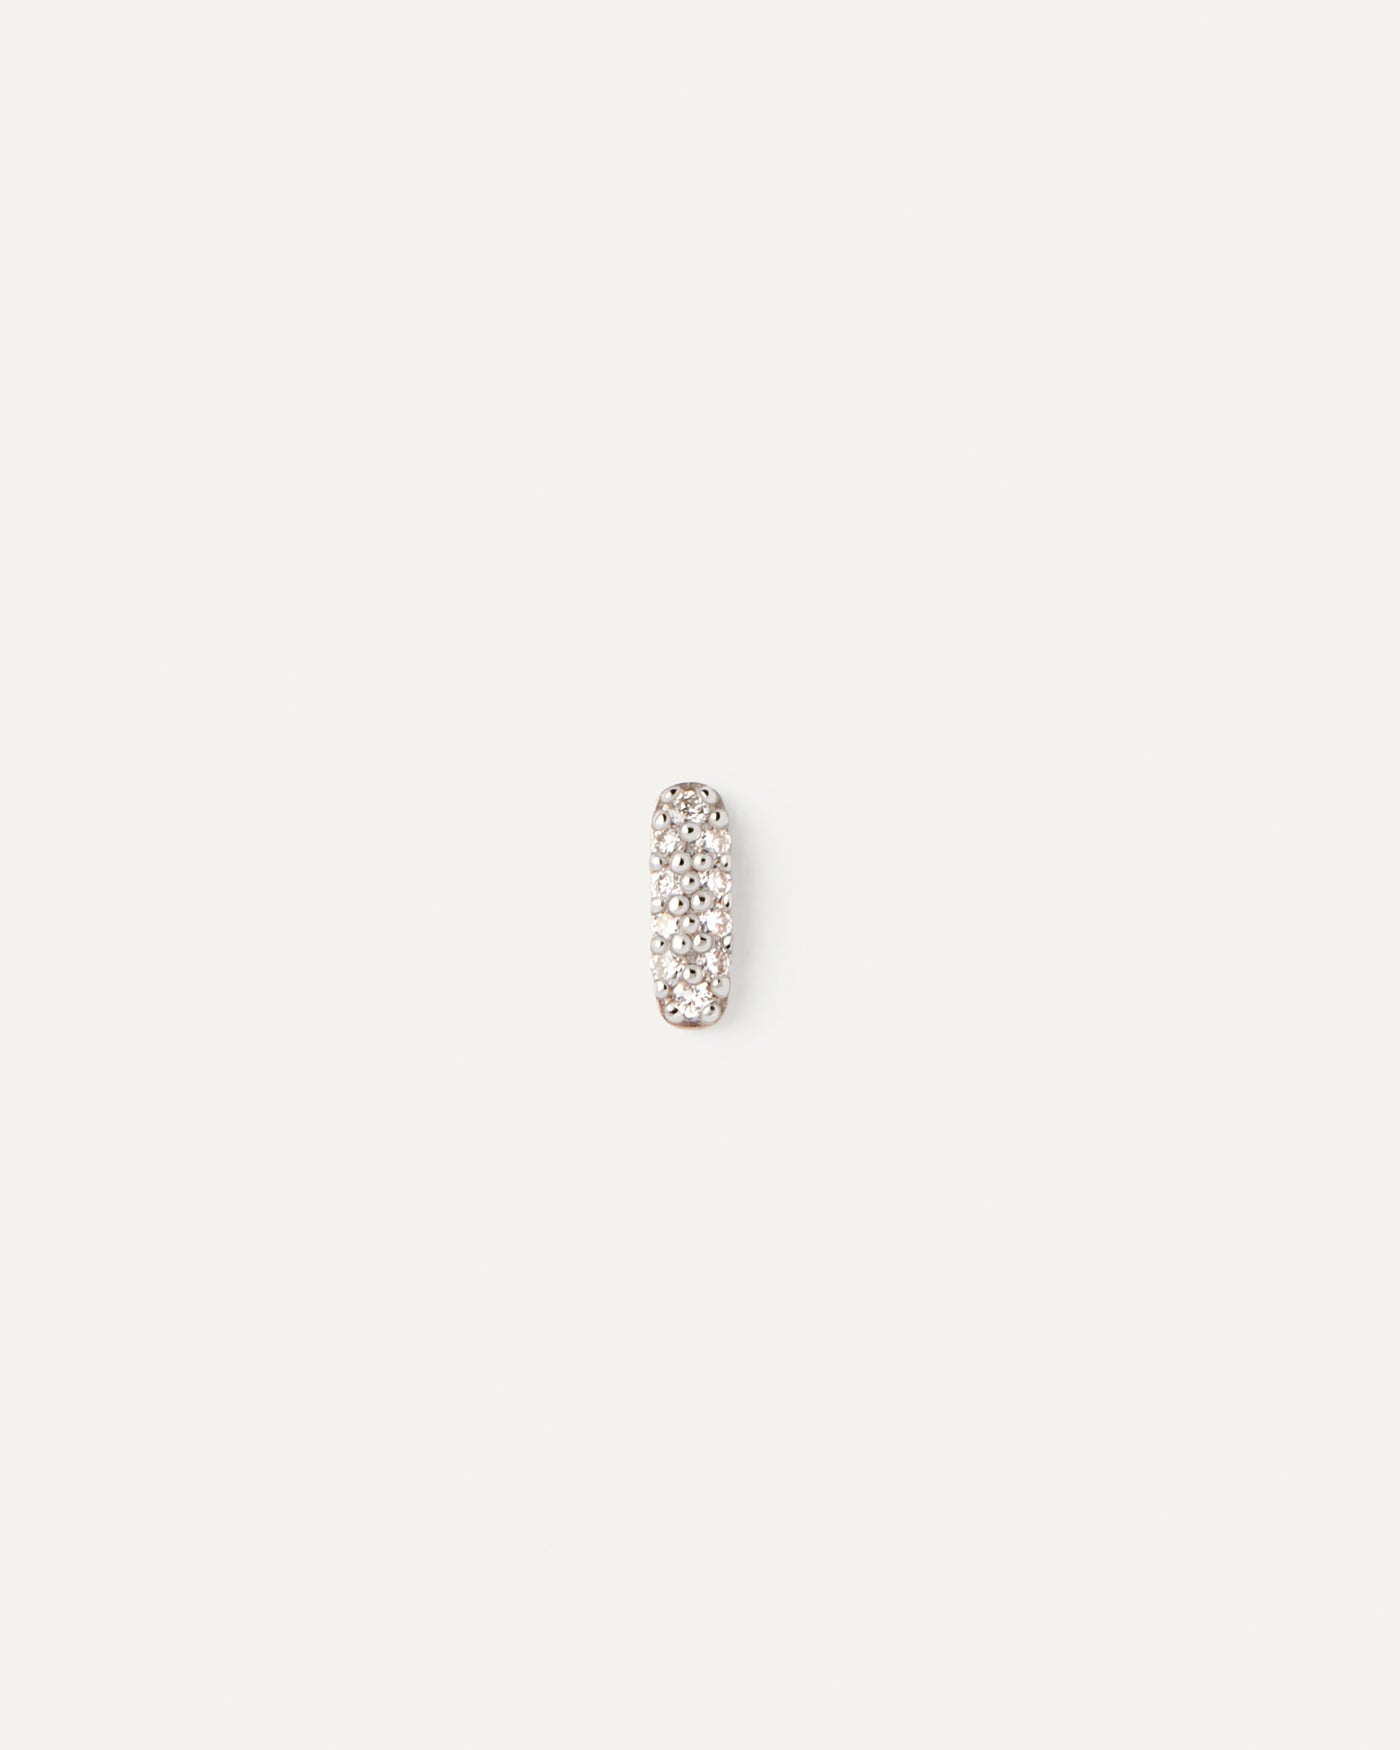 Diamonds and gold Pop single earring. Minimalist single earring in solid yellow gold set with an oval shape pavé lab-grown diamond. Get the latest arrival from PDPAOLA. Place your order safely and get this Best Seller.